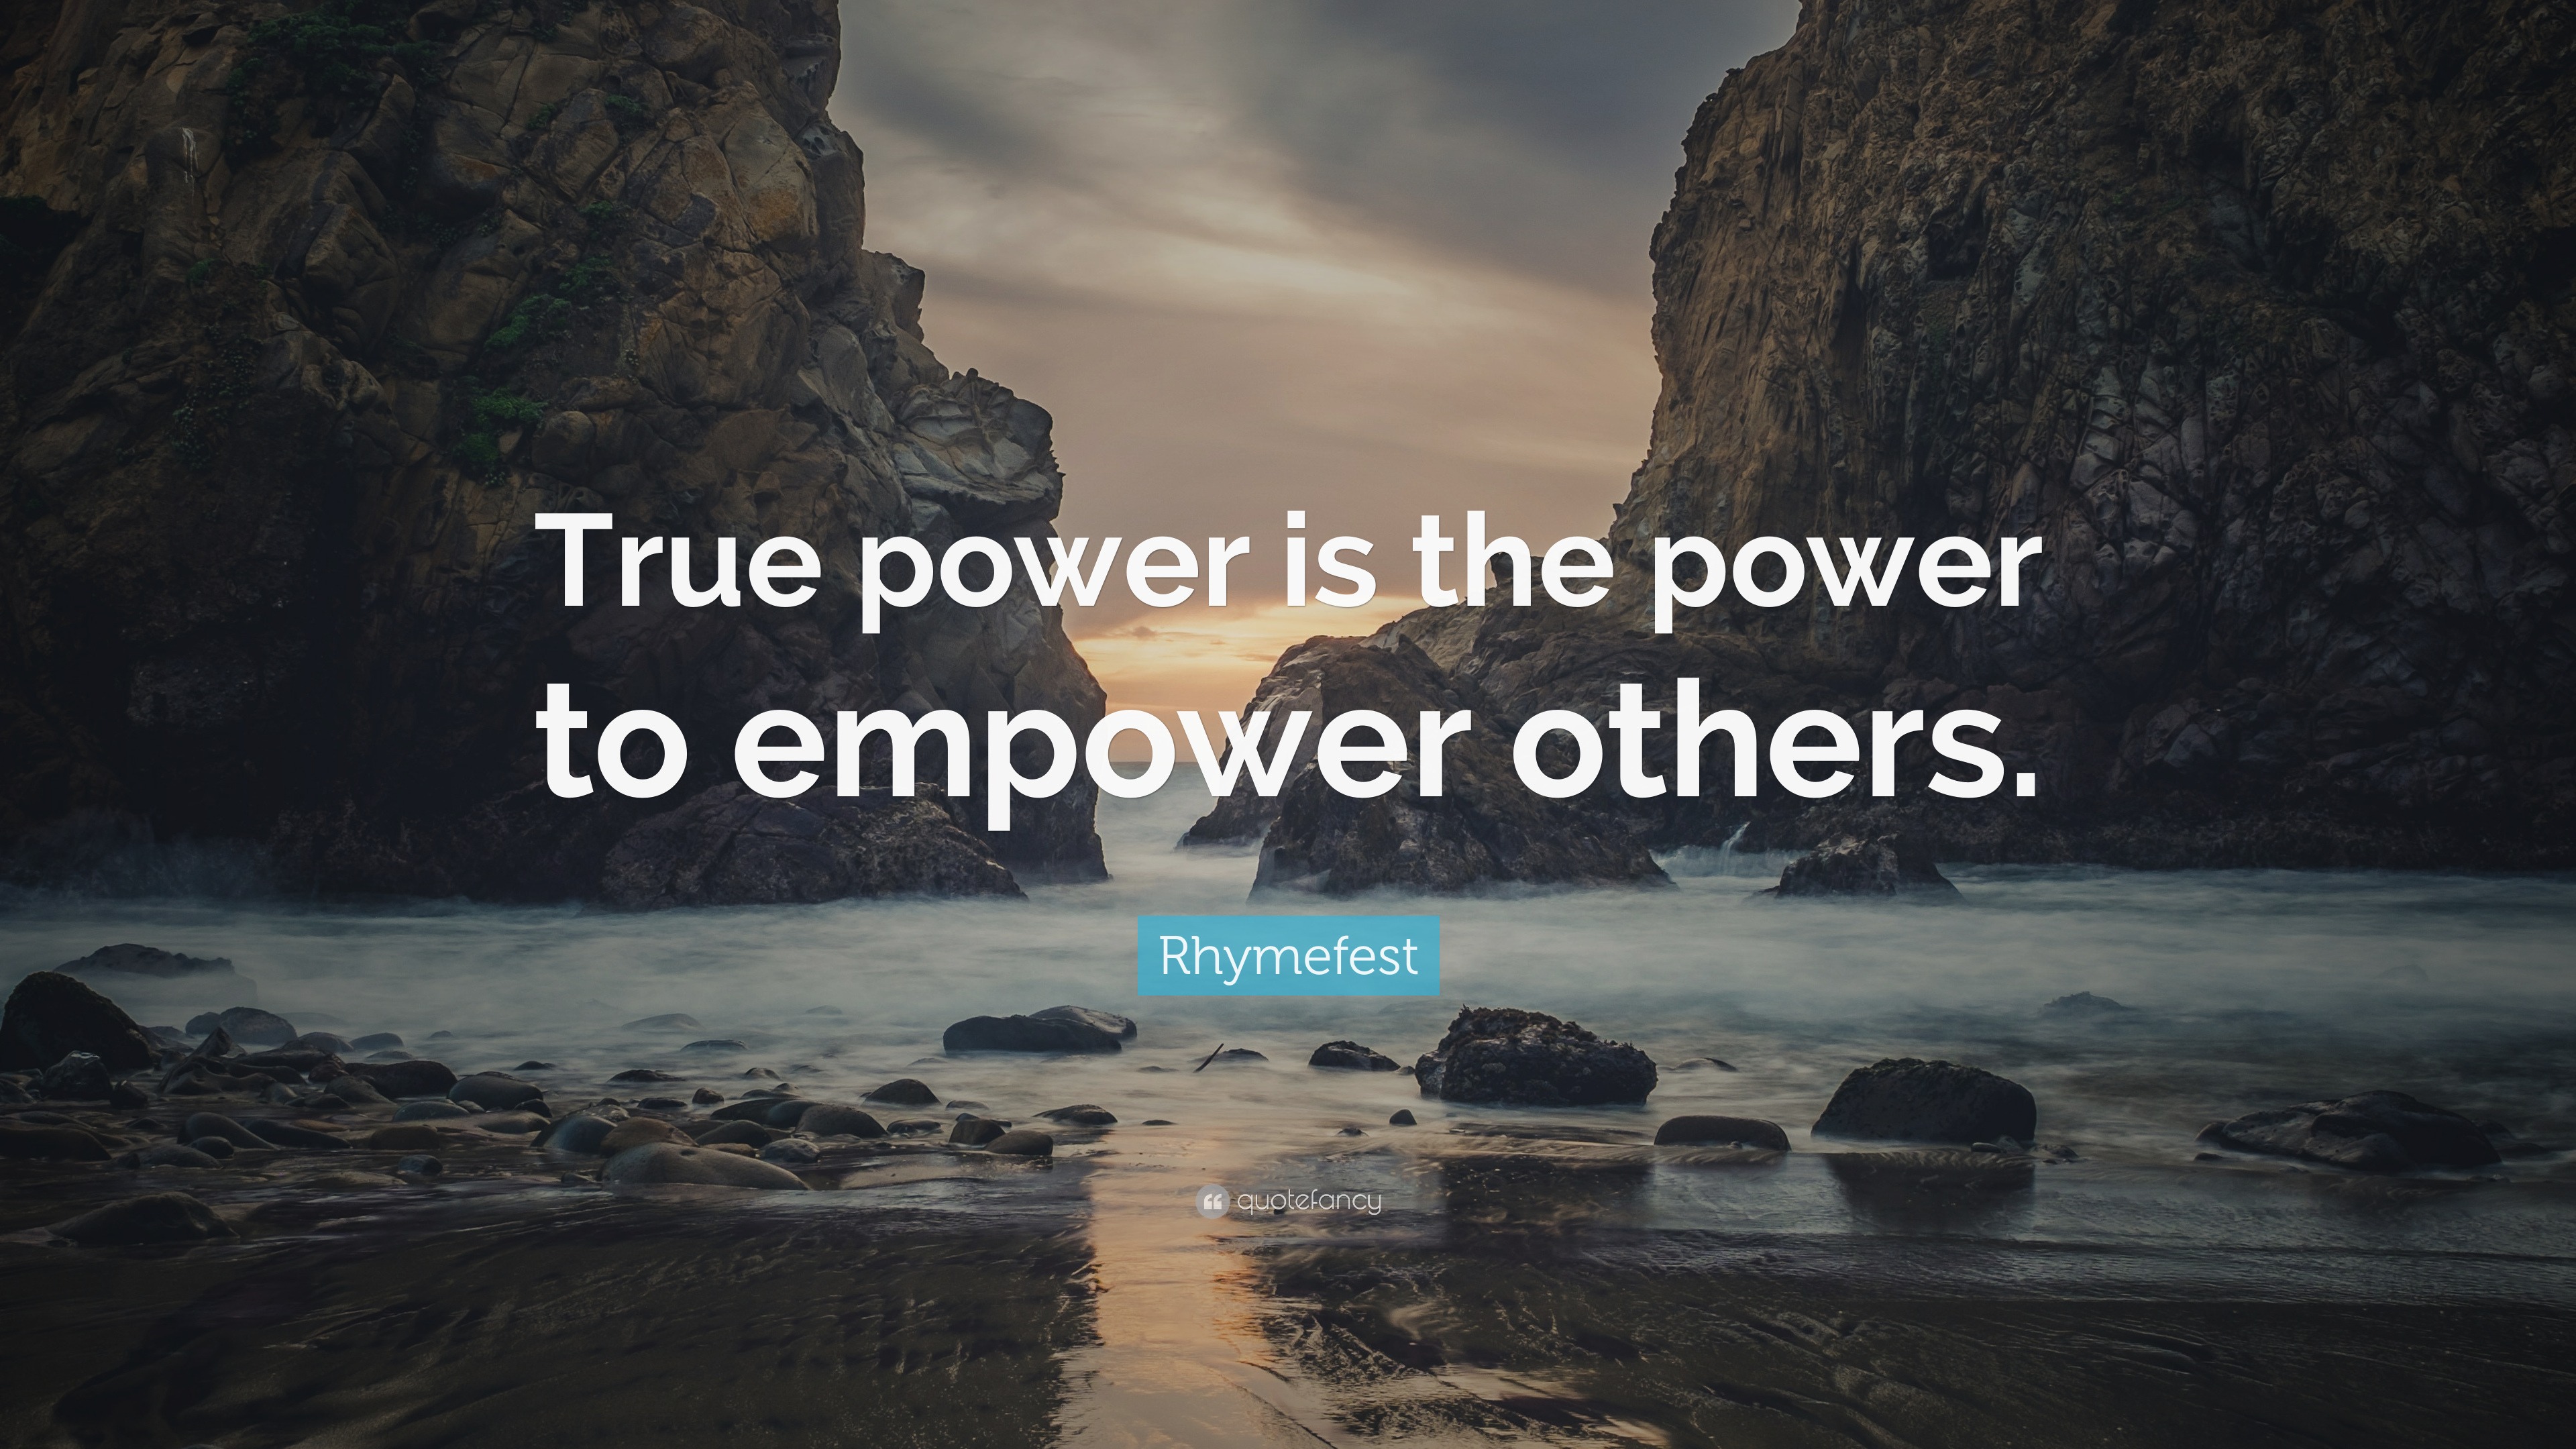 Rhymefest Quote “True power is the power to empower others.”